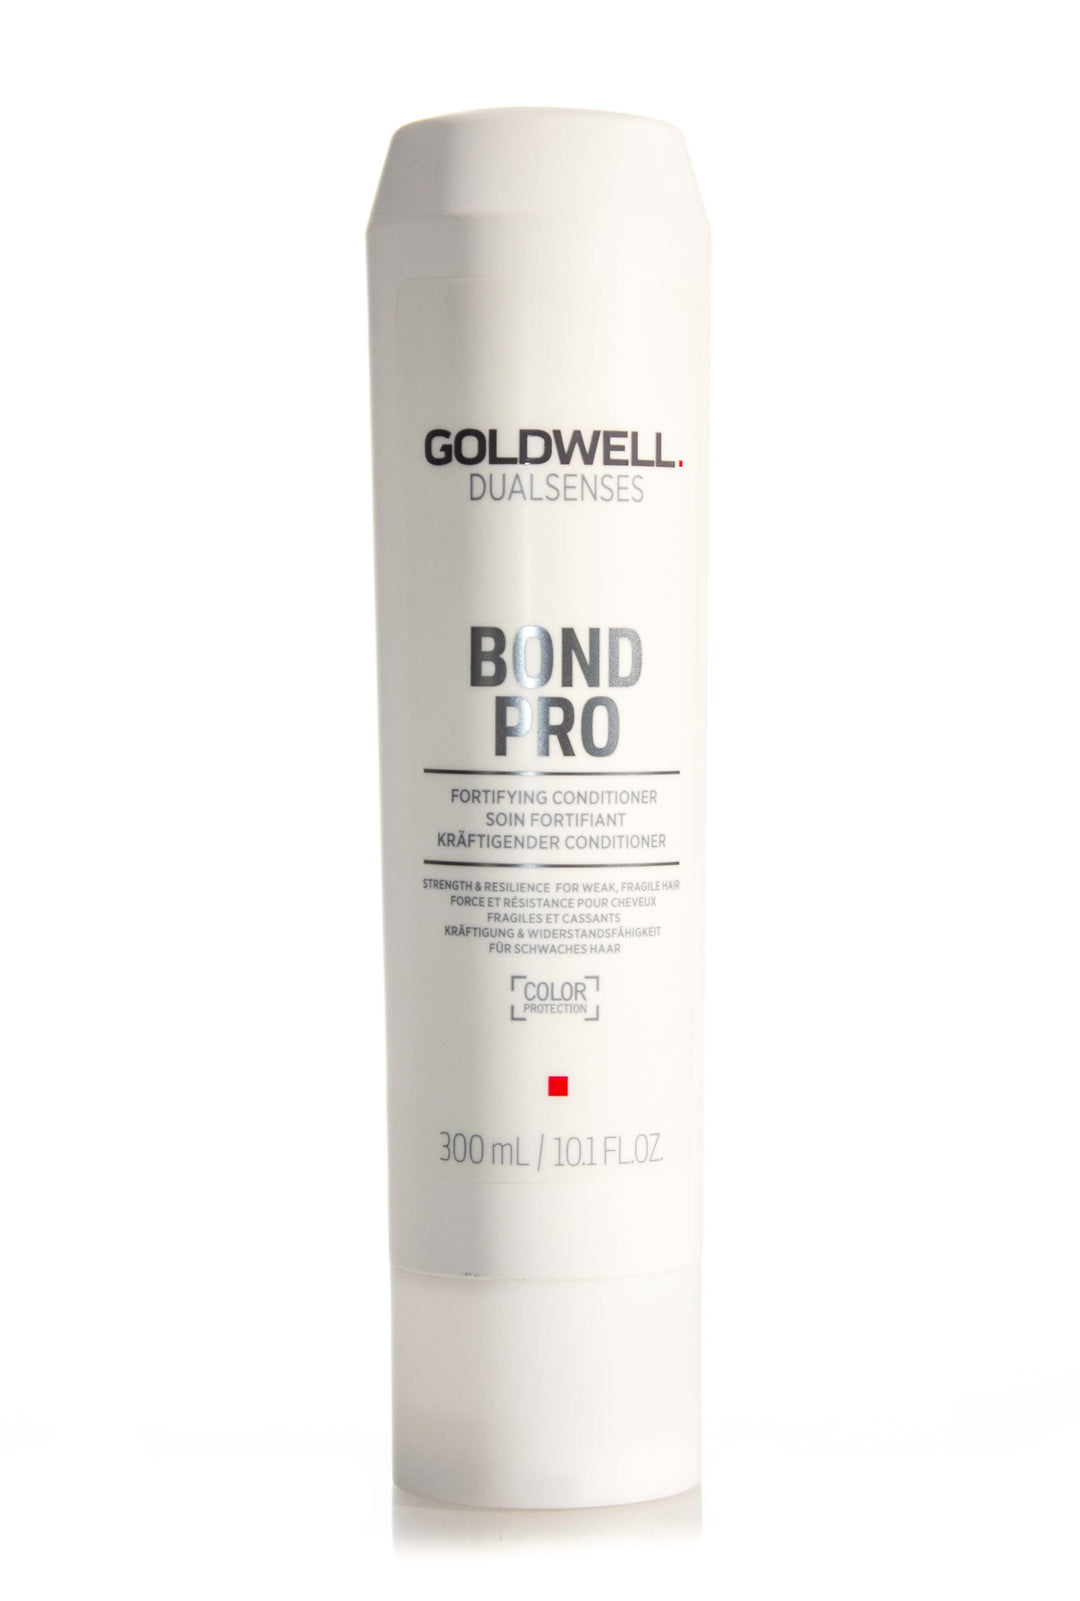 GOLDWELL Dual Senses Bond Pro Fortifying Conditioner | Various Sizes